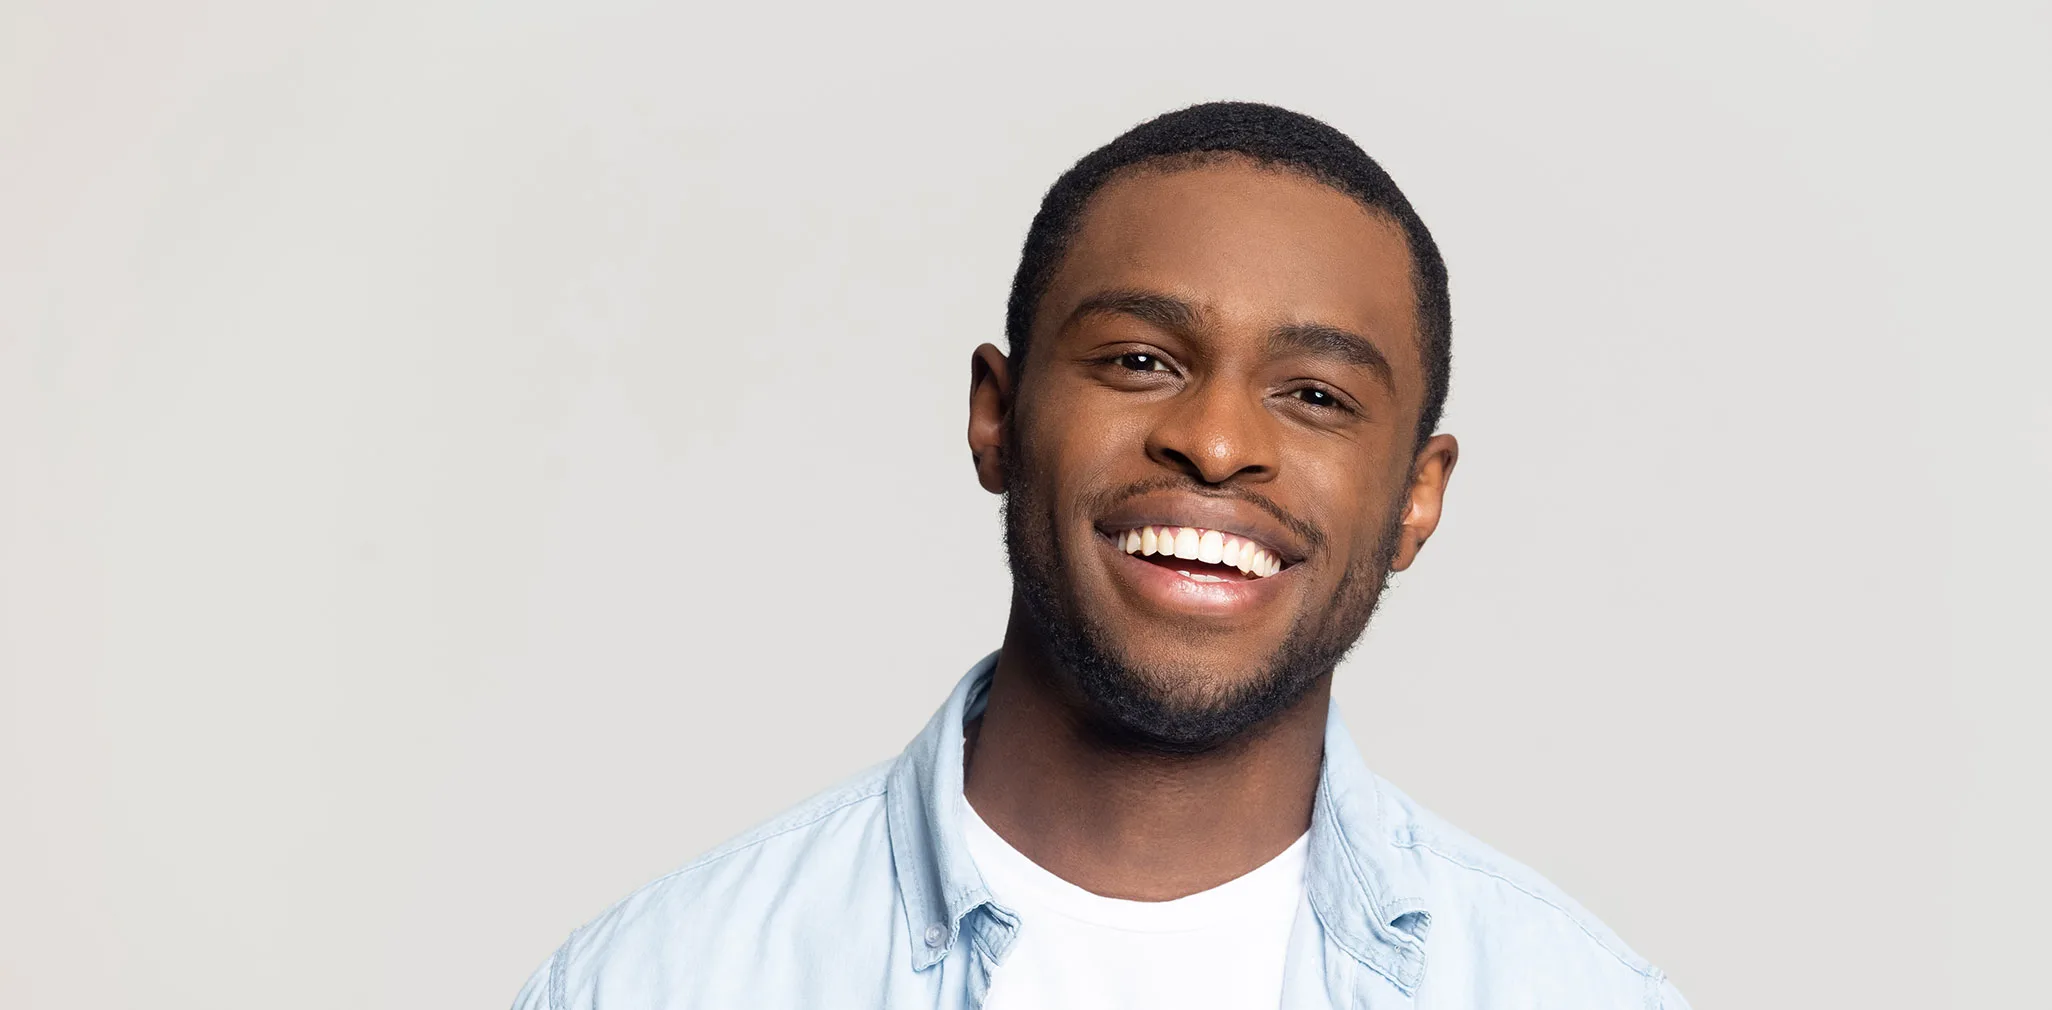 Head shot portrait happy African American man with wide healthy smile